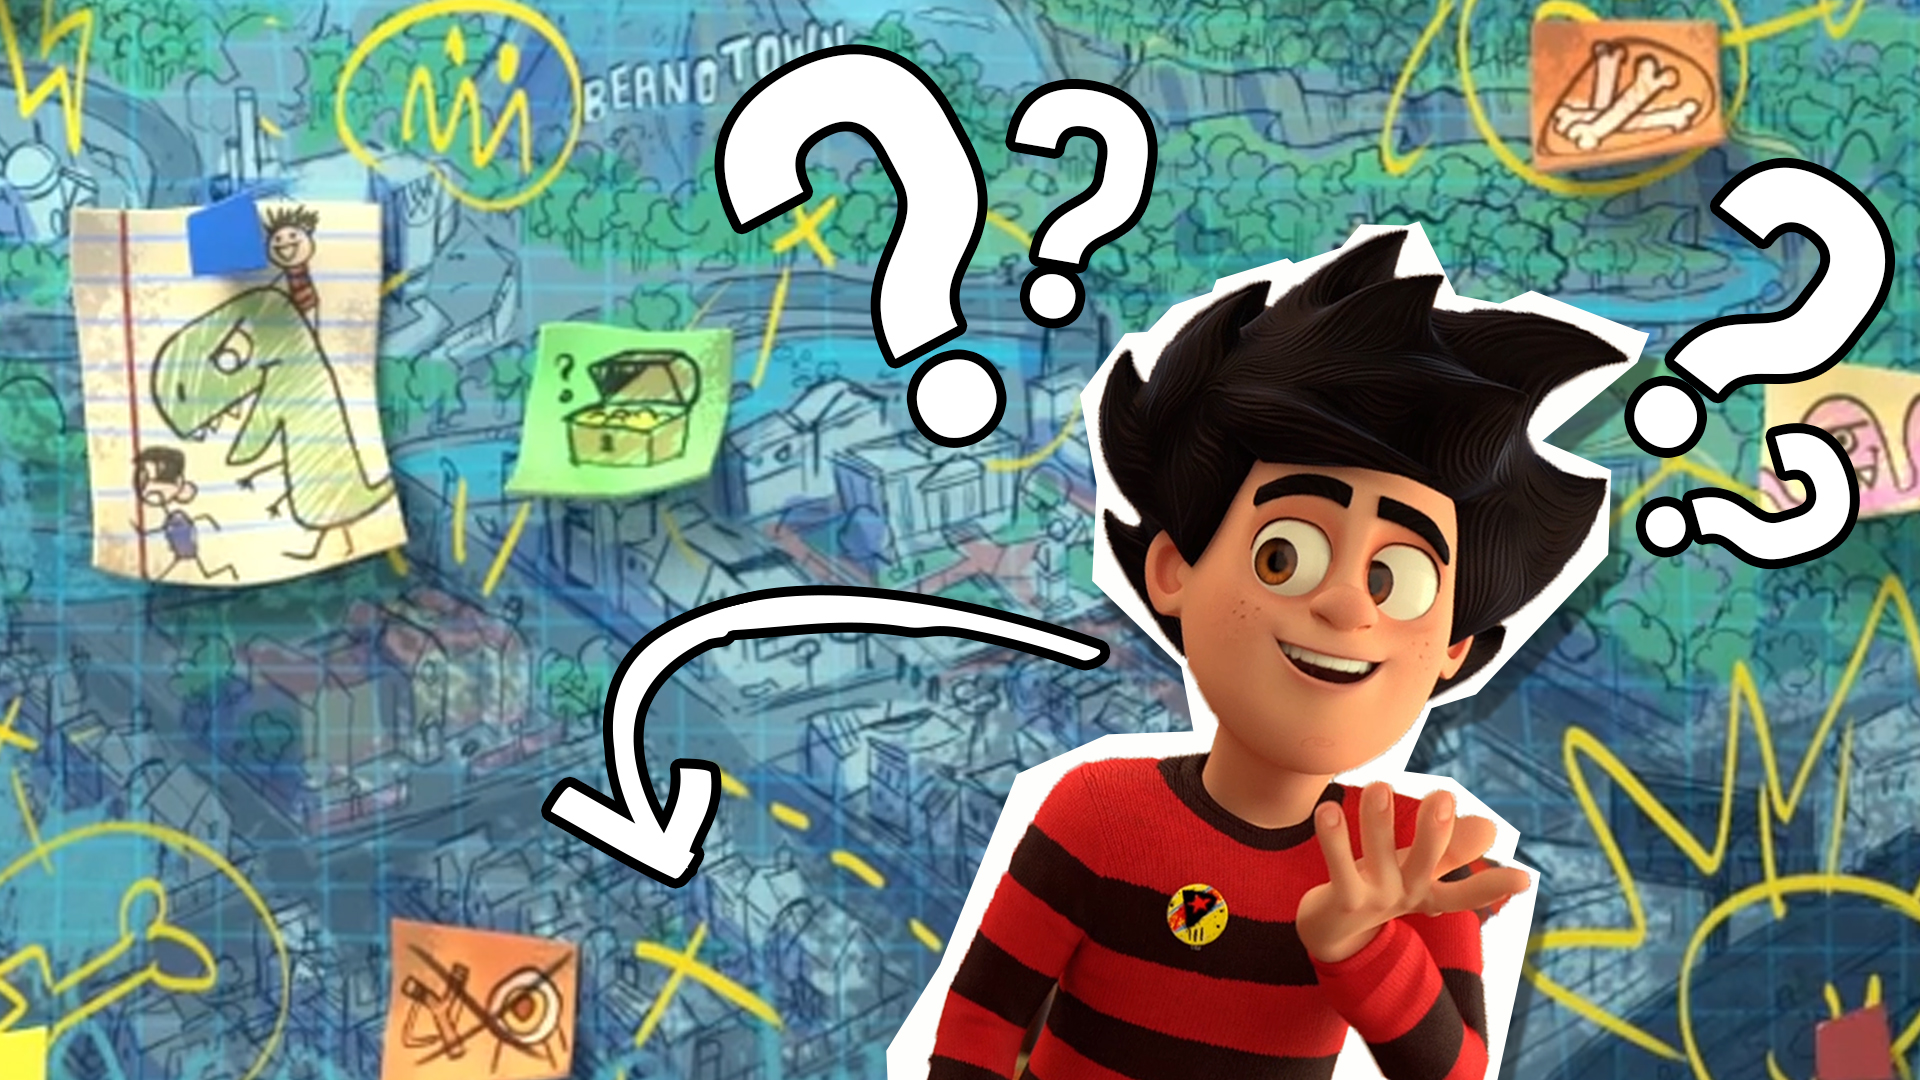 Where would YOU live in Beanotown?